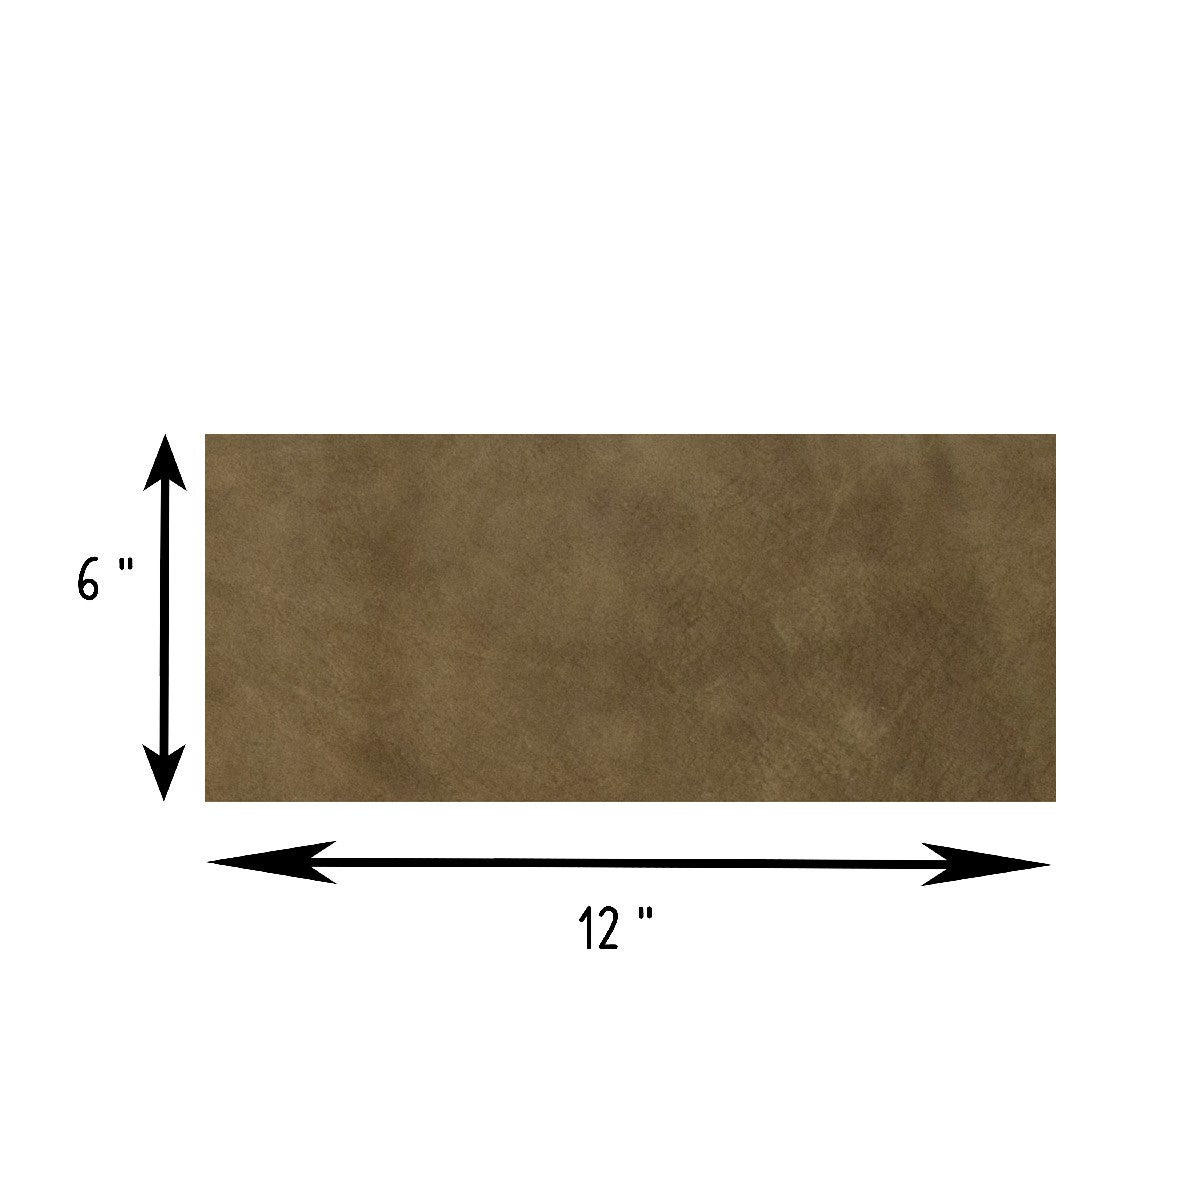 Genuine Leather Tooling and Crafting Sheets | Heavy Duty Full Grain Cowhide (2.5mm) | Nubuck Brown - FabricLA.com